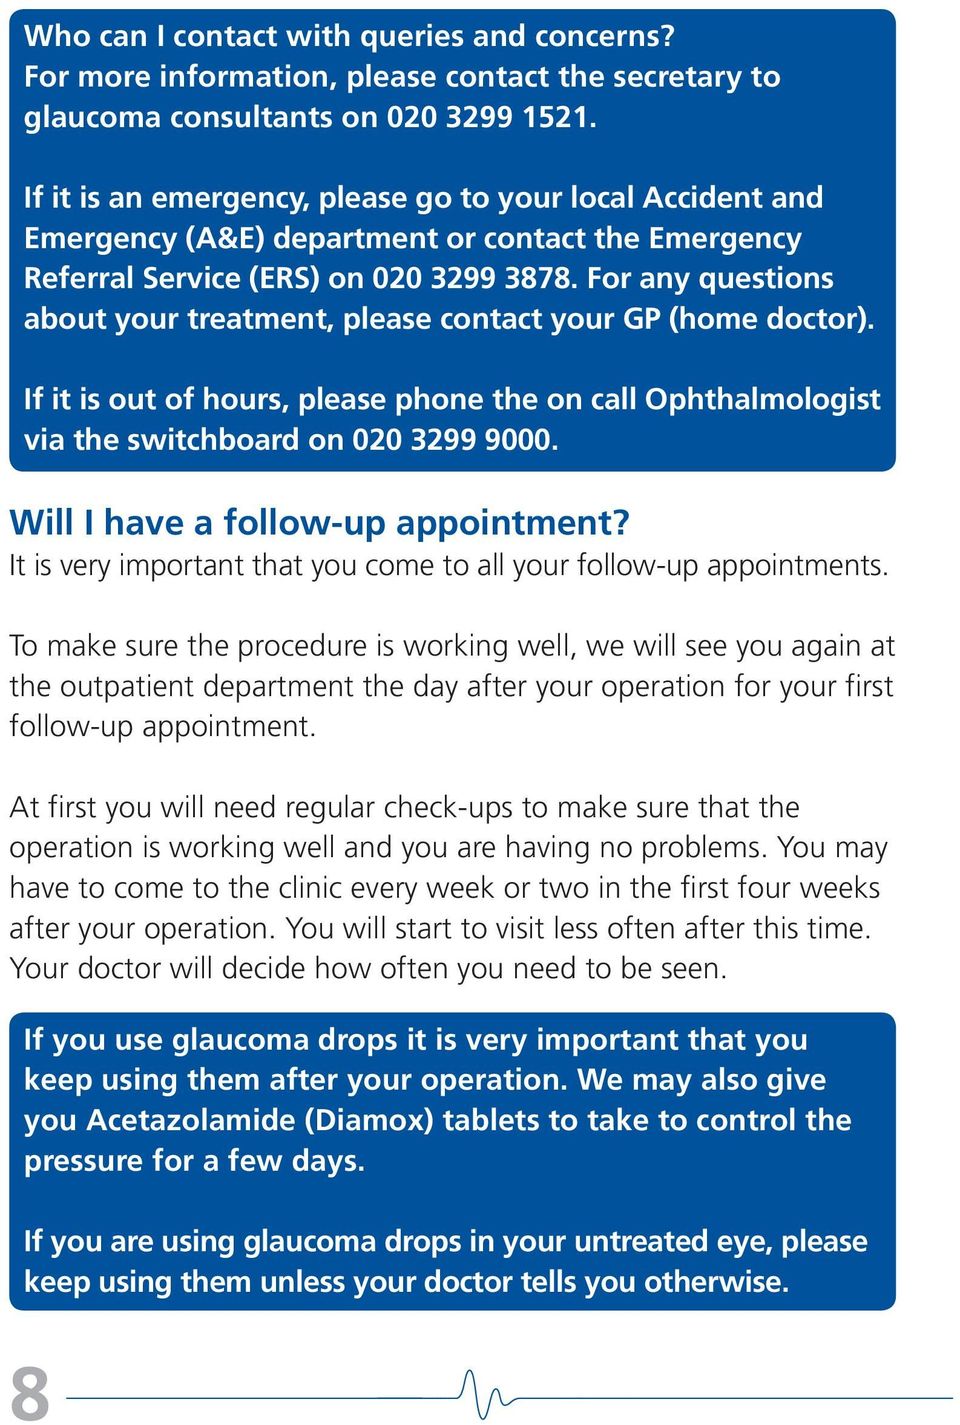 For any questions about your treatment, please contact your GP (home doctor). If it is out of hours, please phone the on call Ophthalmologist via the switchboard on 020 3299 9000.